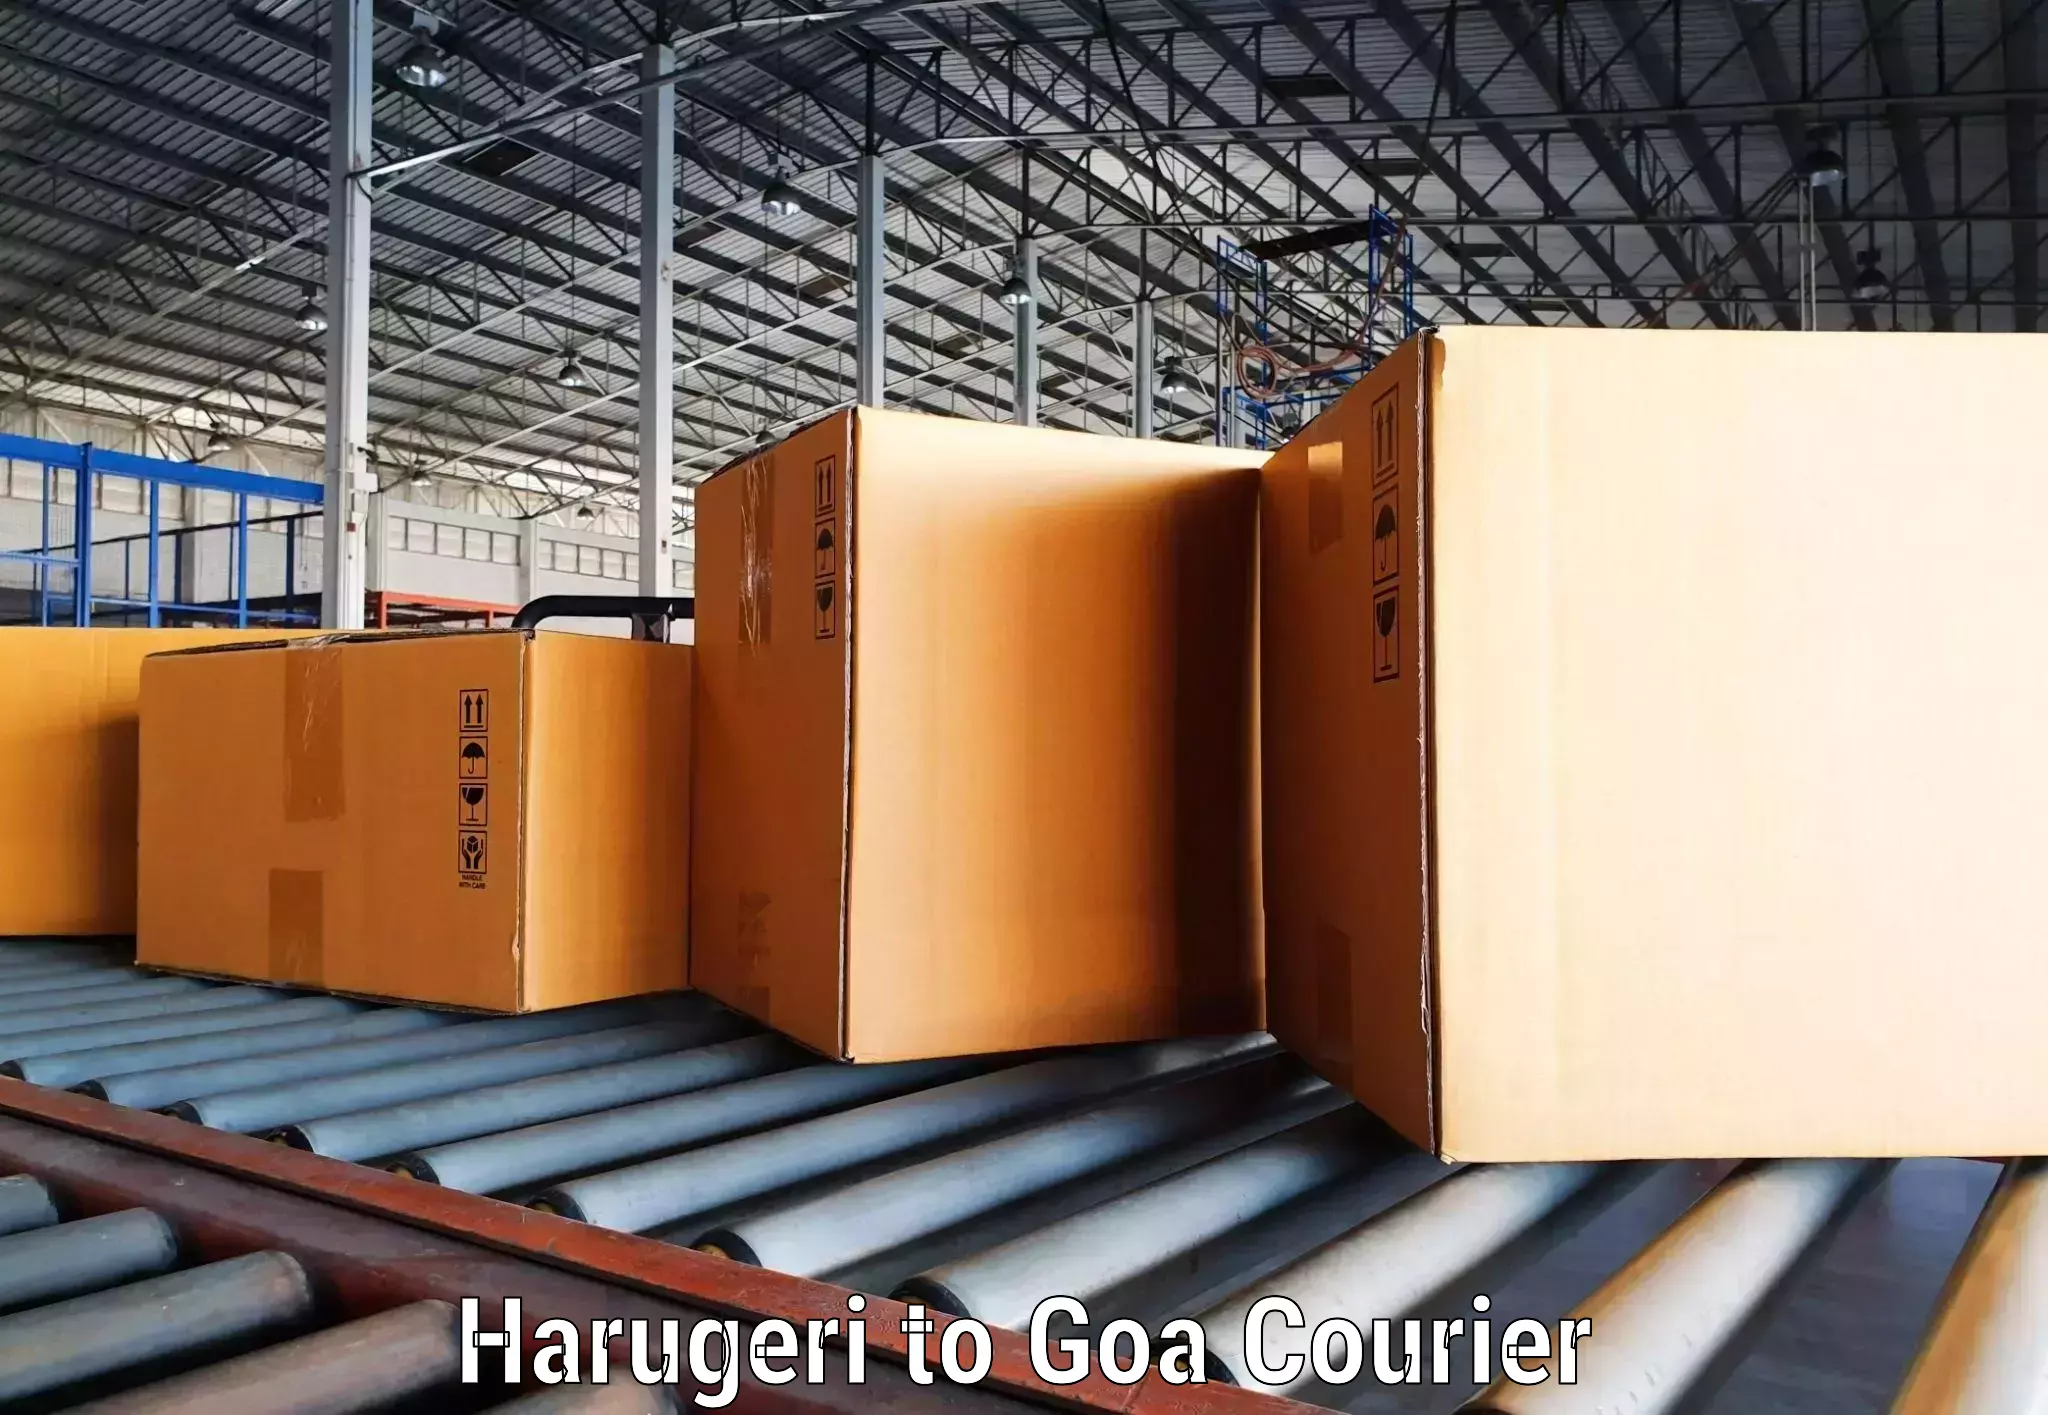 24/7 courier service in Harugeri to Goa